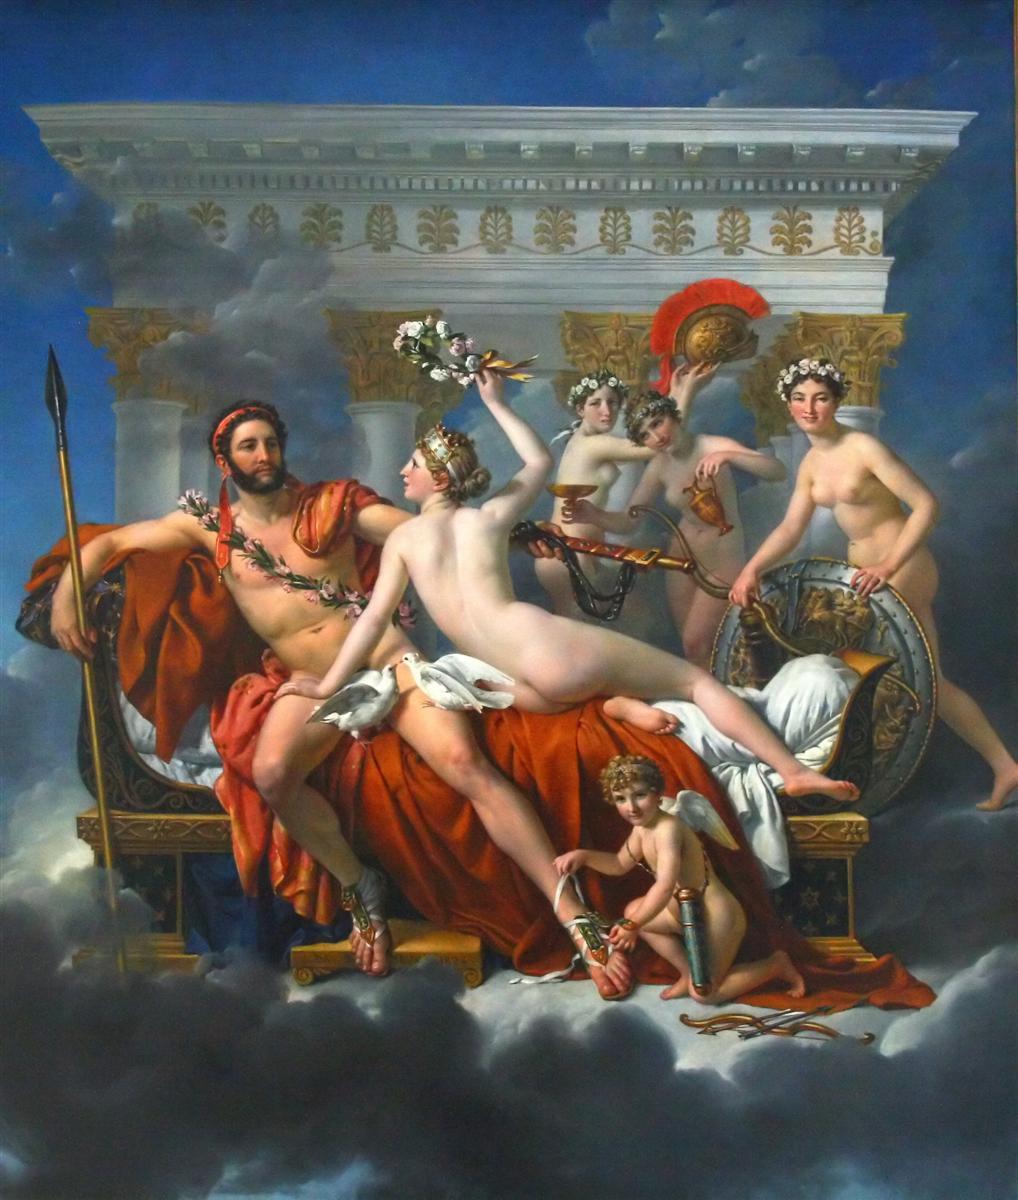 17. Mars Disarmed by Venus and the Three Graces, Jacques-Louis David (1824)[also, the cover of an extraordinary work edited by  @scaliger and others ]